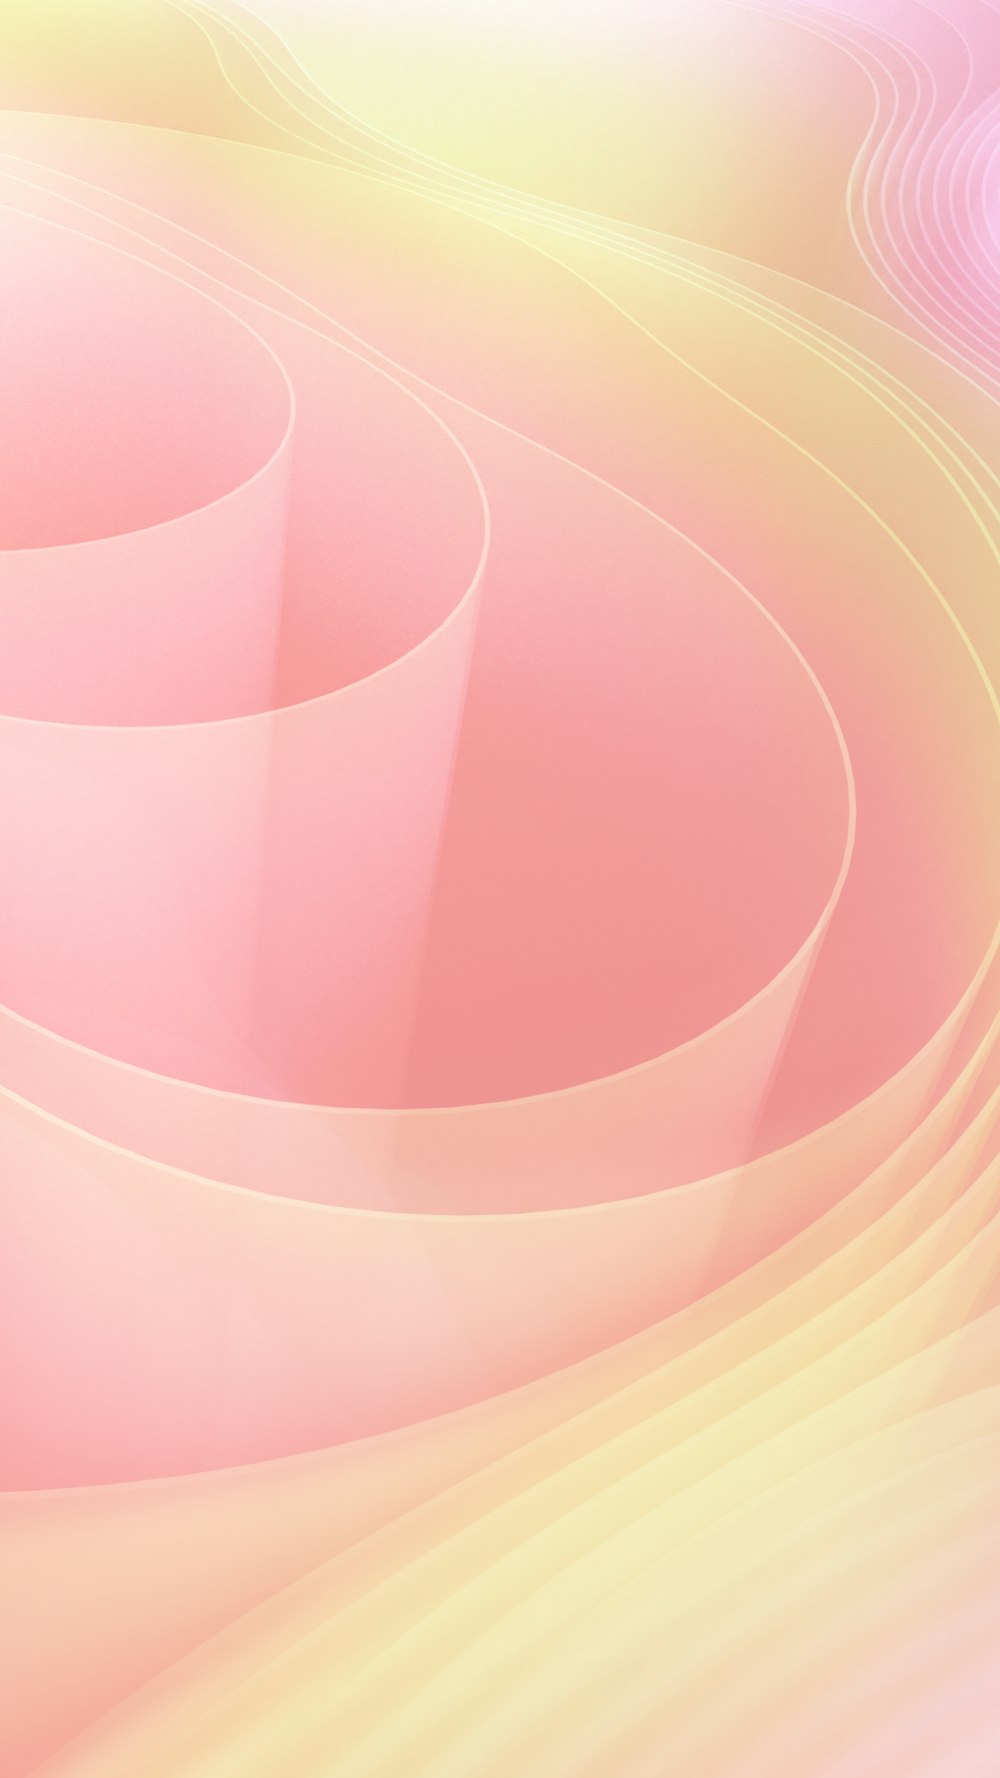 a pink and yellow abstract background with curves